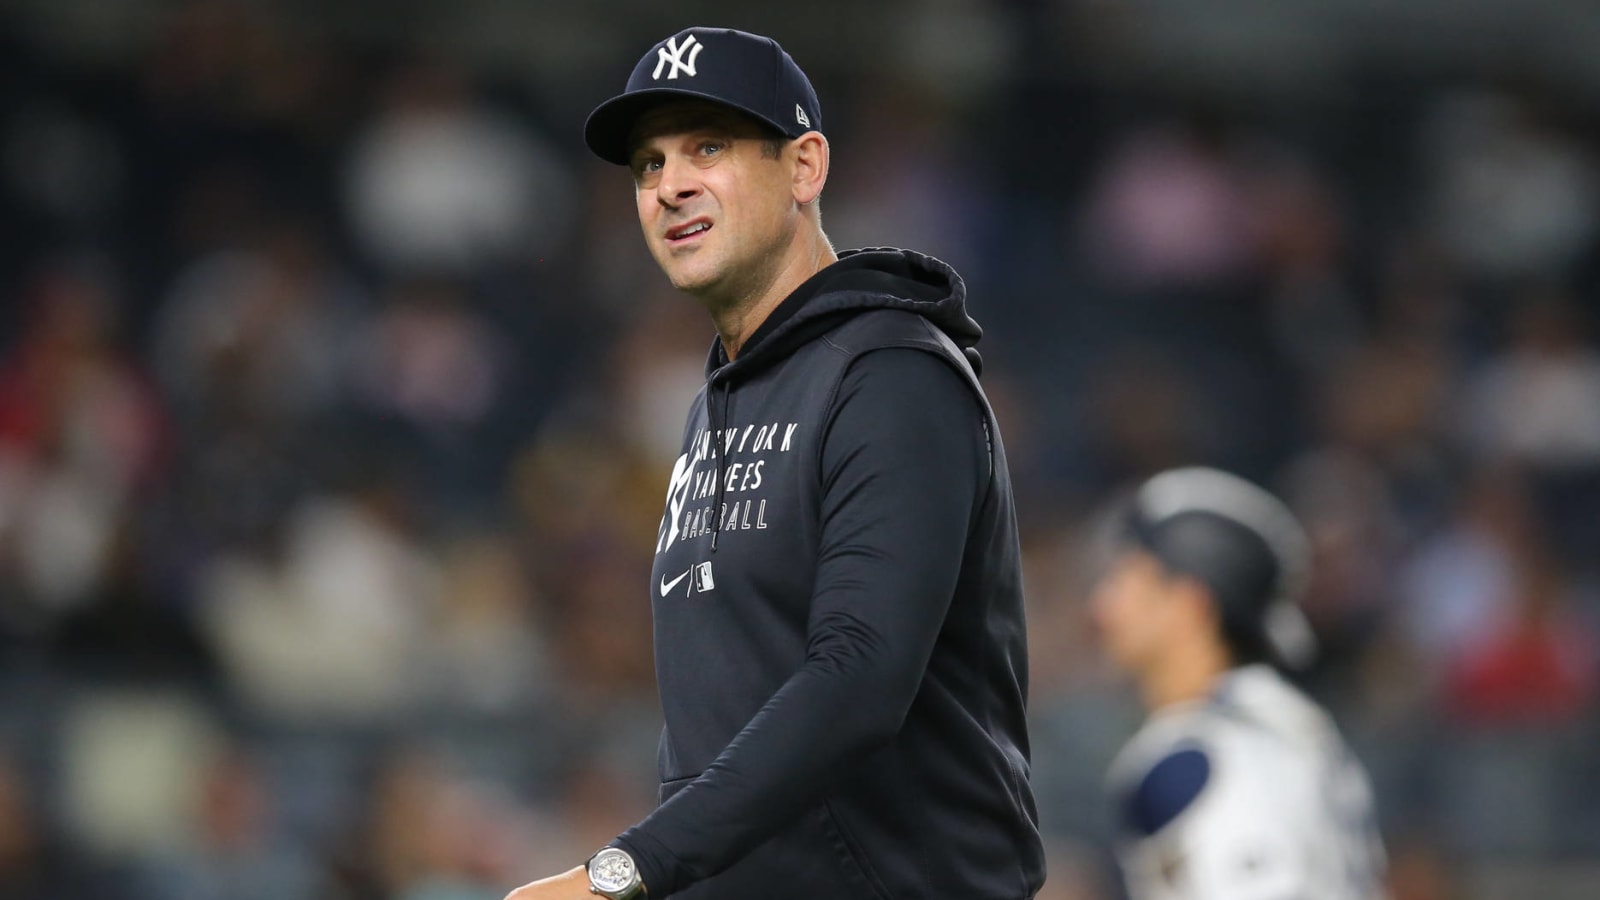 Yankees' future murky following loss to Red Sox